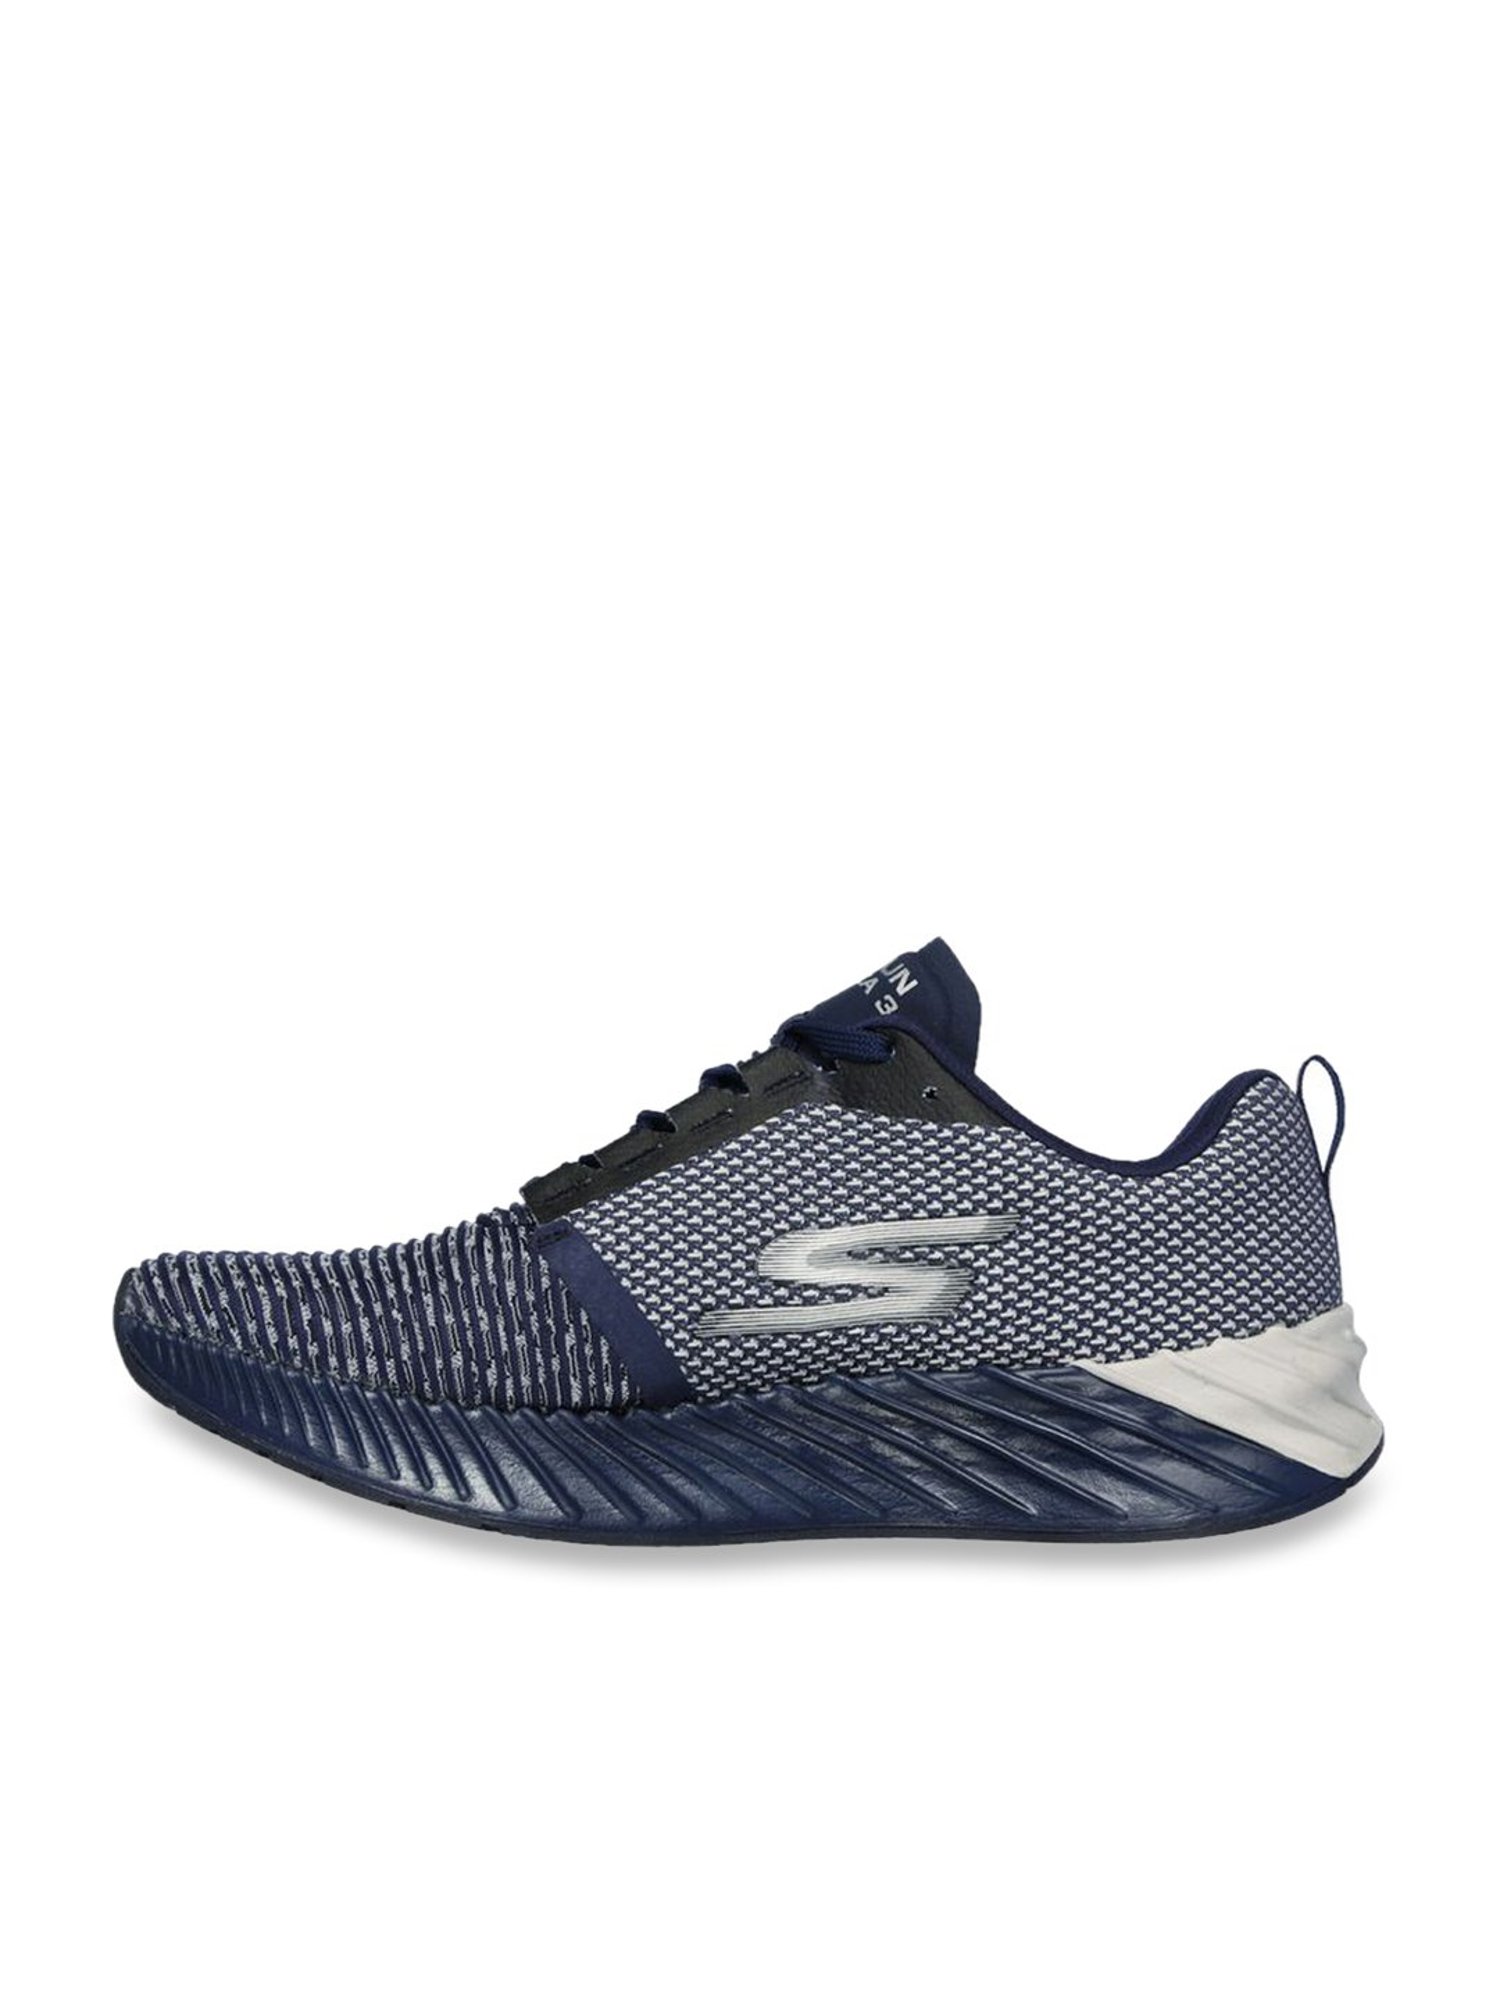 Buy Skechers GO RUN FORZA 3 Navy Running Shoes for at Best Price @ Tata CLiQ